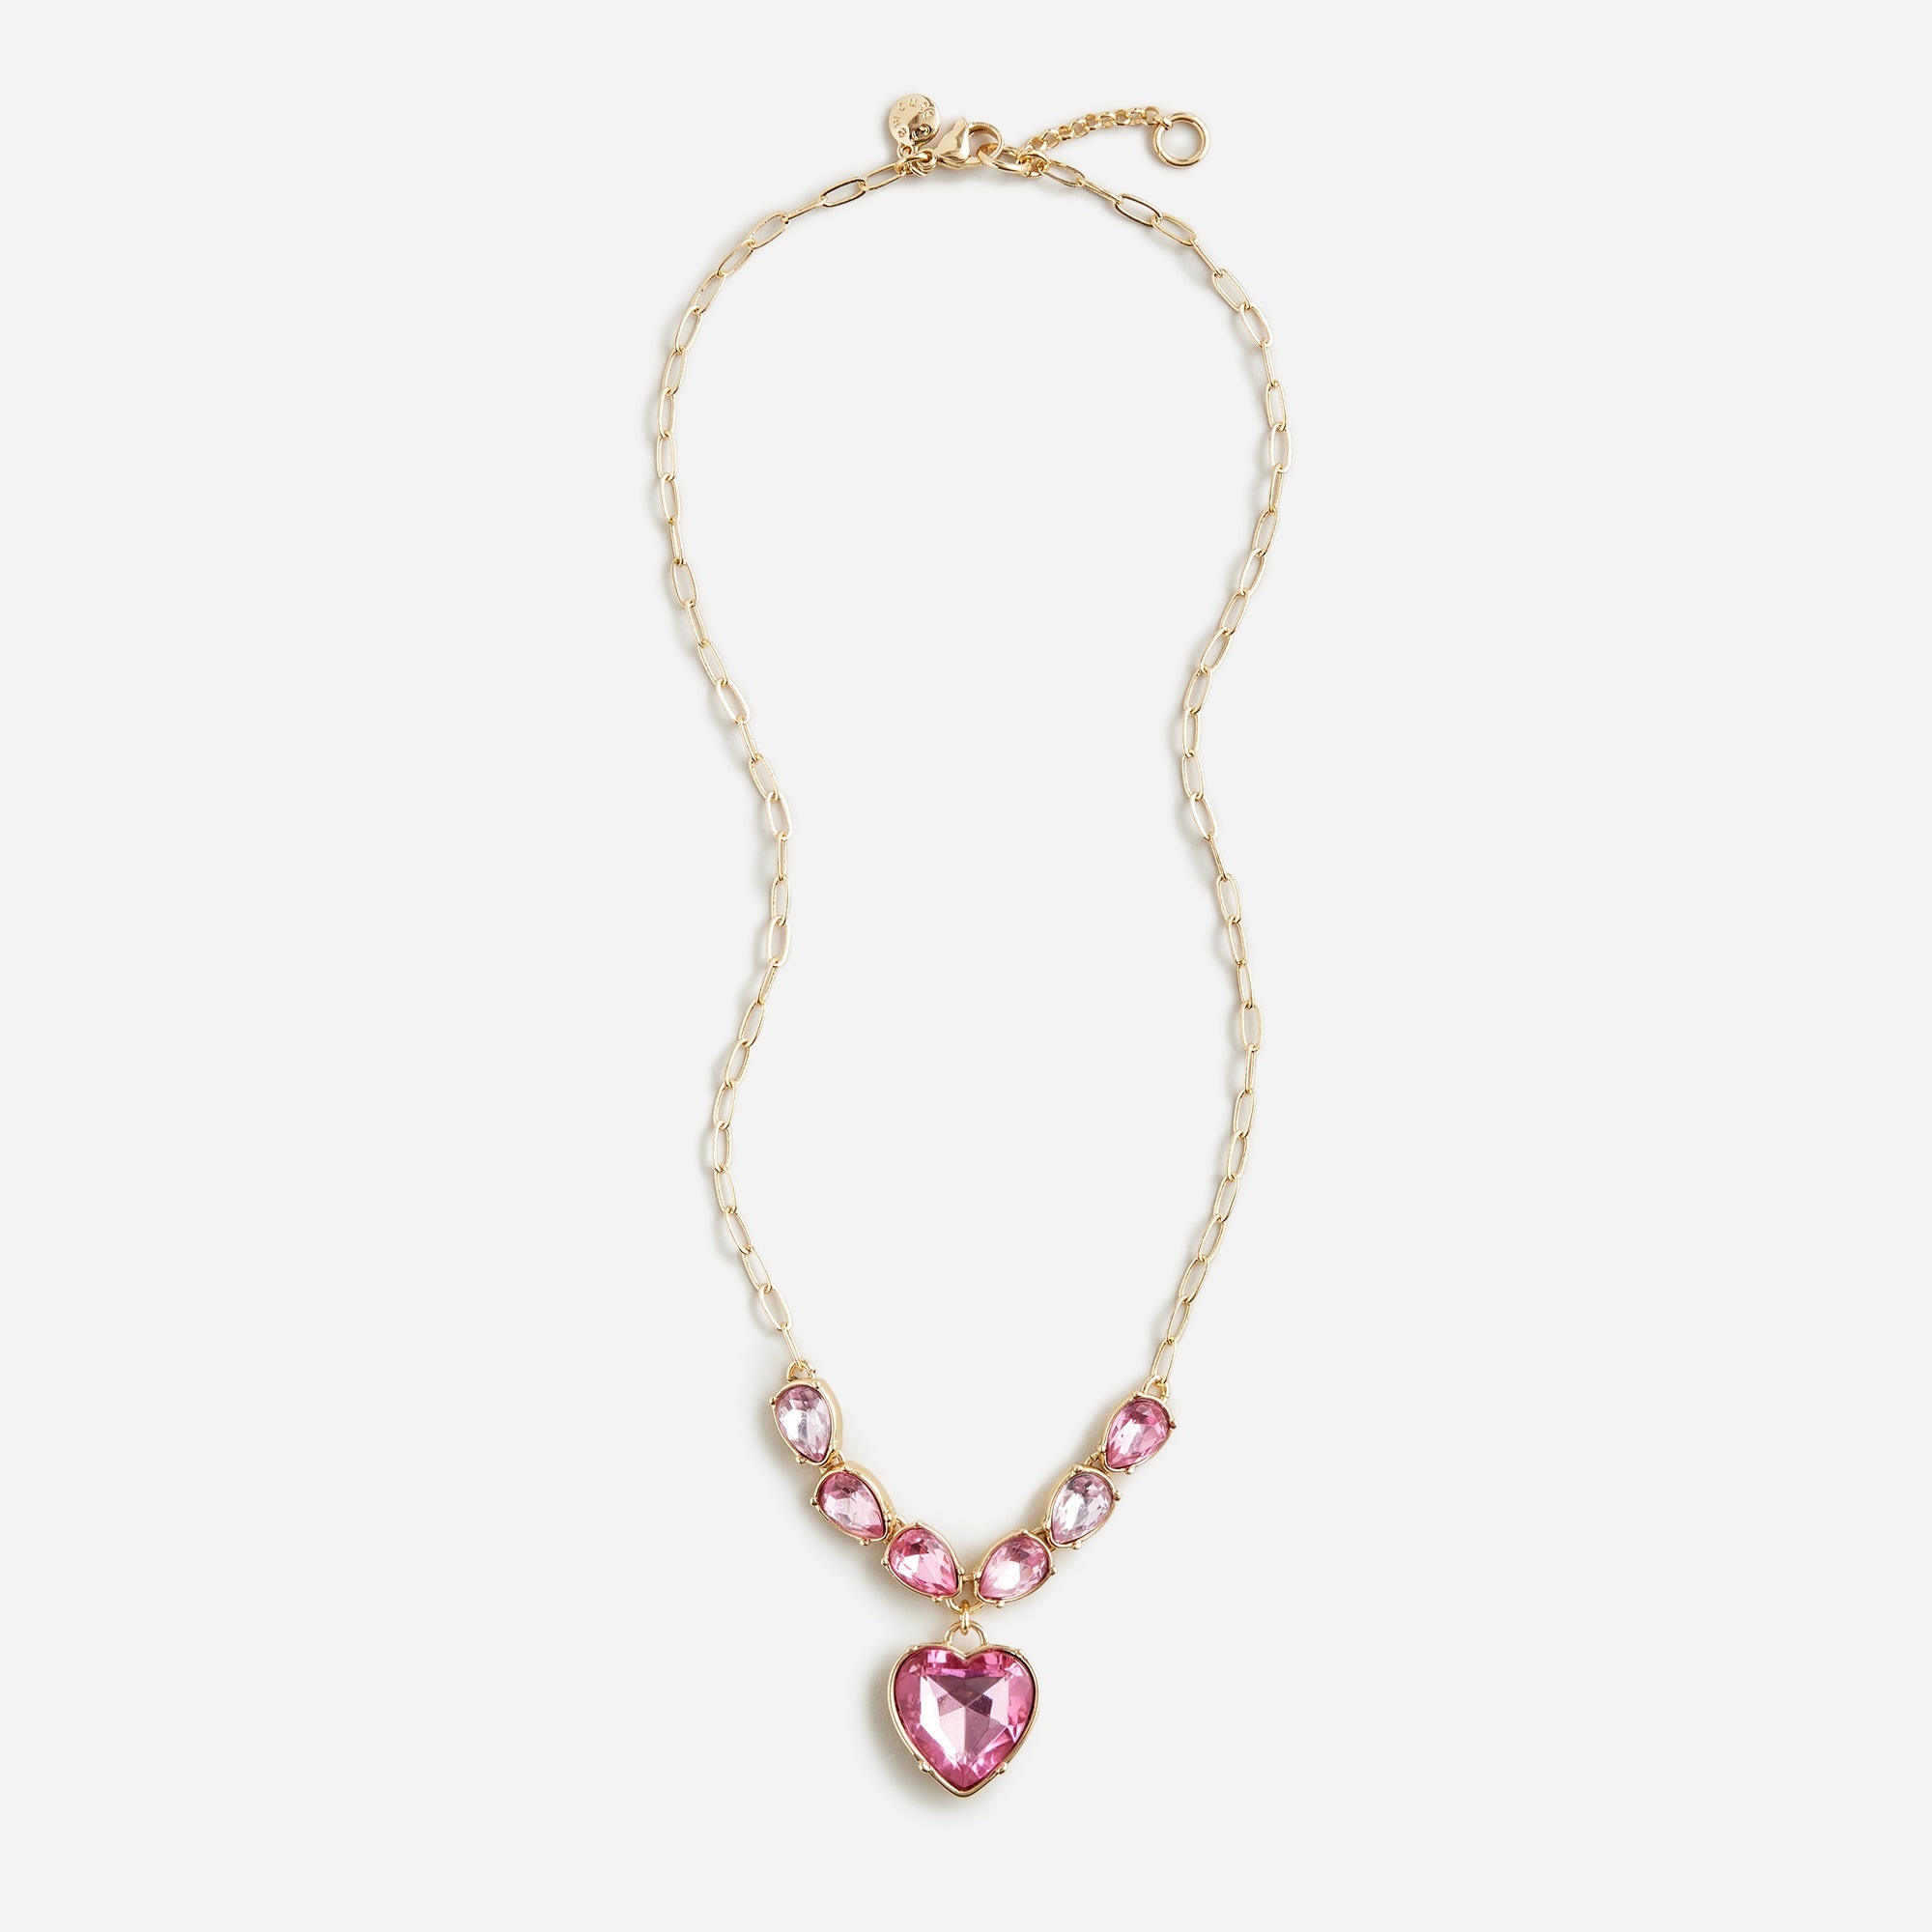  Girls' heart charm necklace